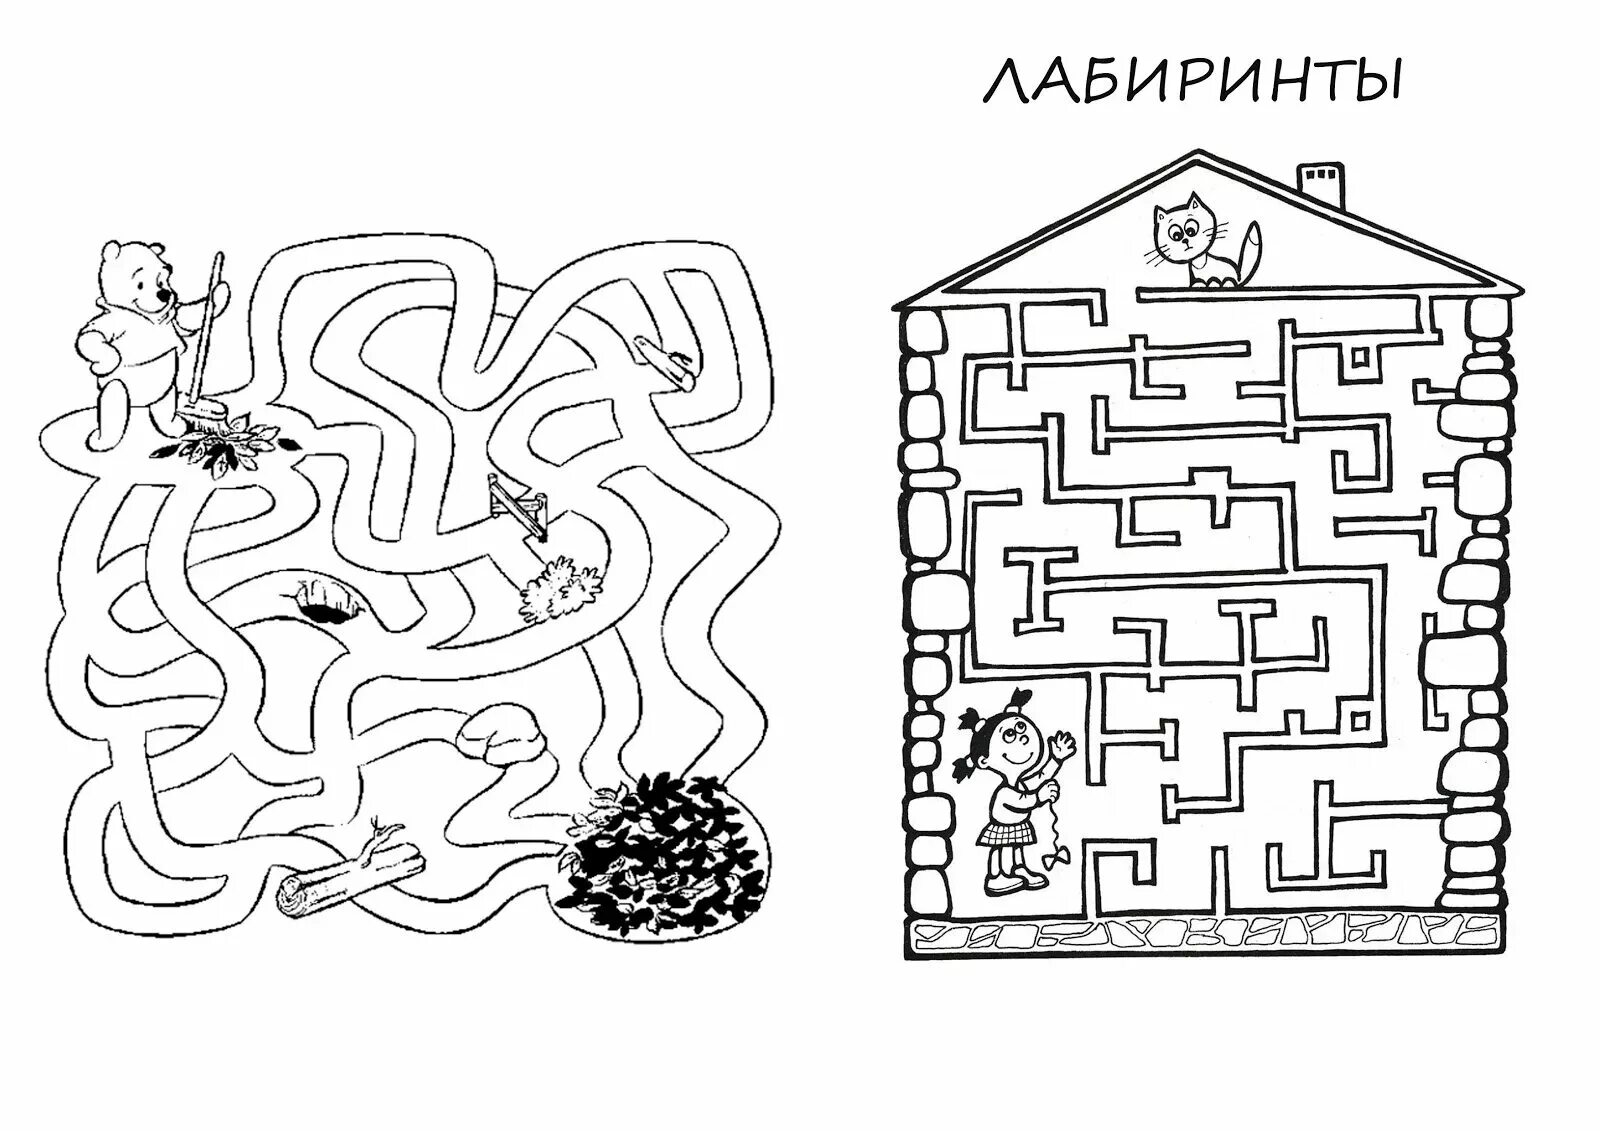 Labyrinth for 7 year olds #1